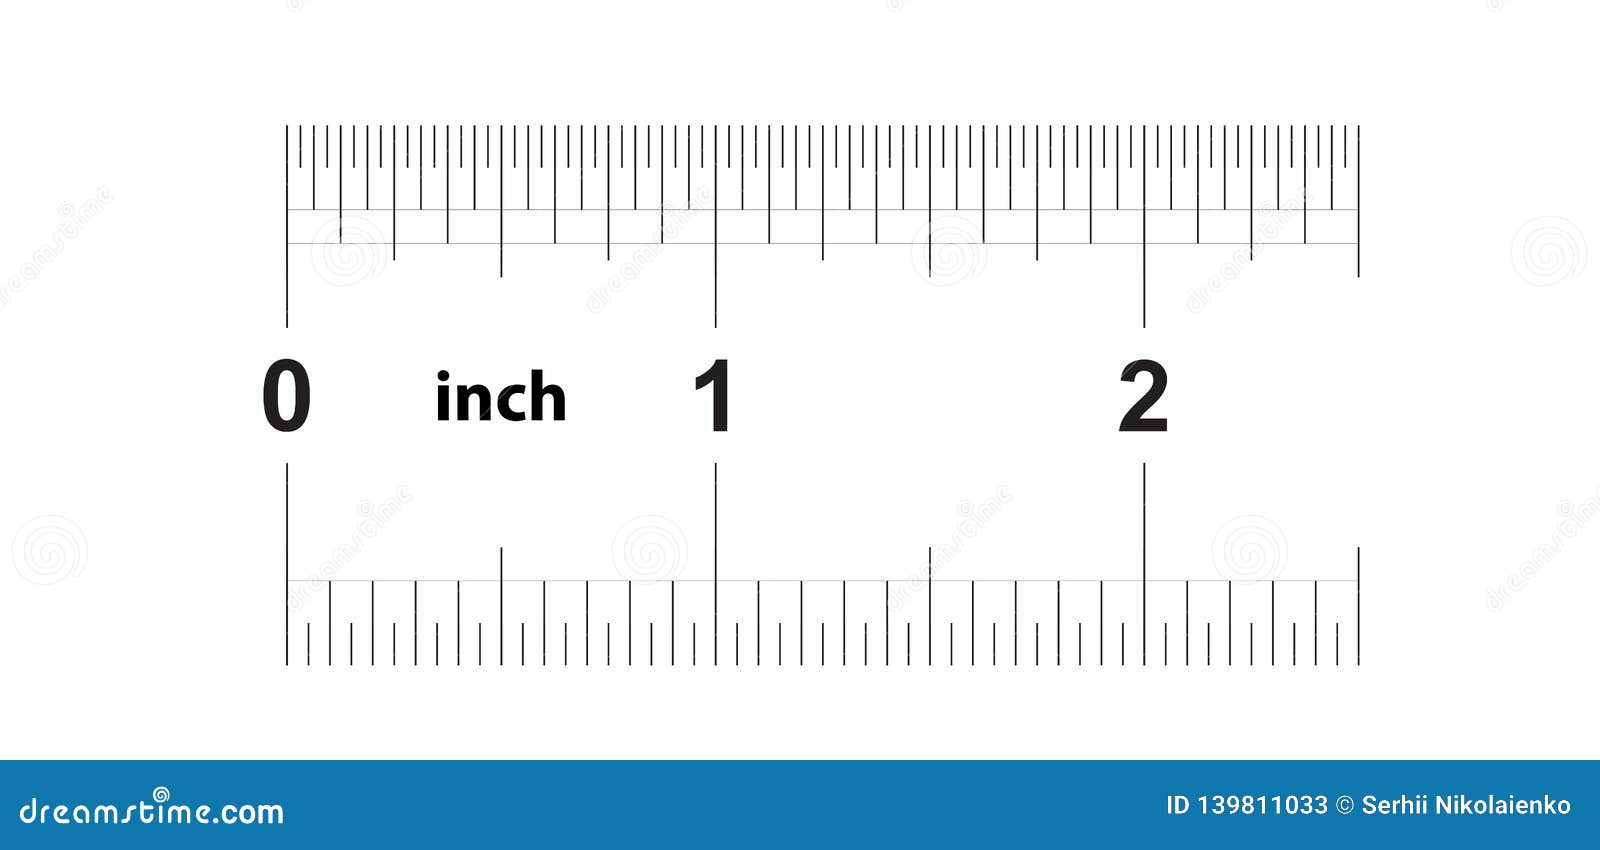 Ruler Measurement Chart Inches